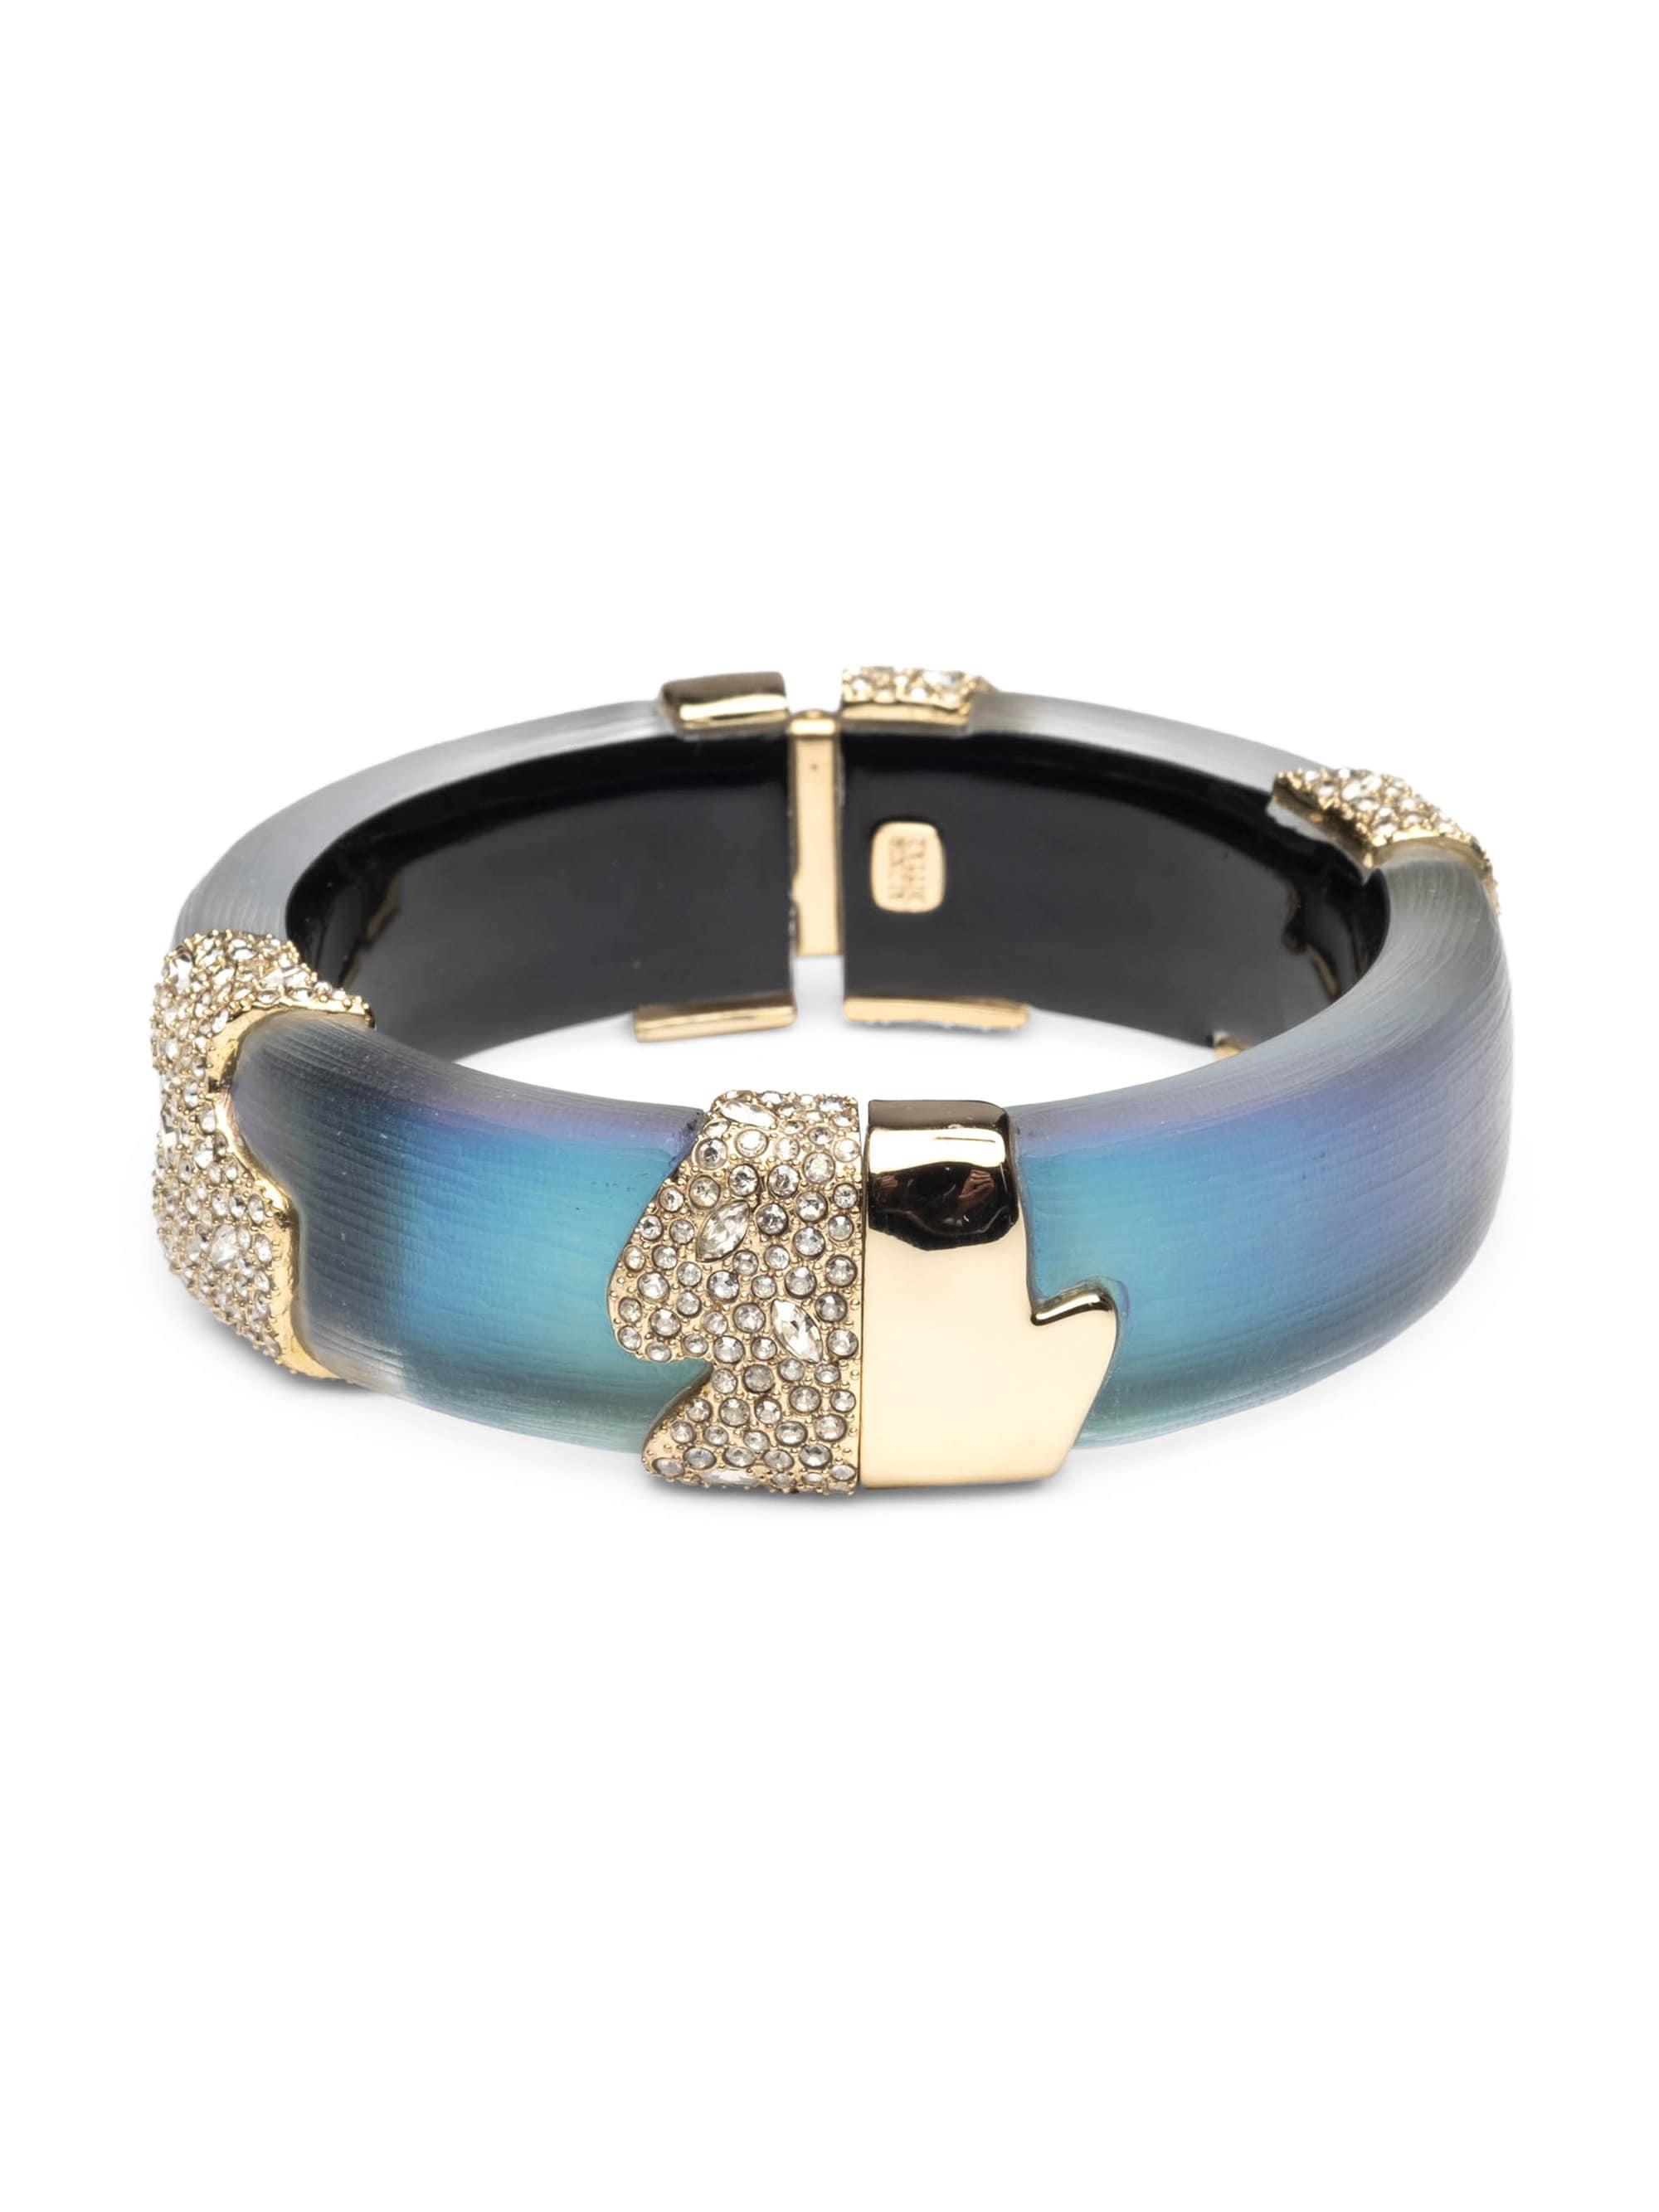 Alexis Bittar 10k Goldplated & Crystal Encrusted Sectioned Hinge Bangle